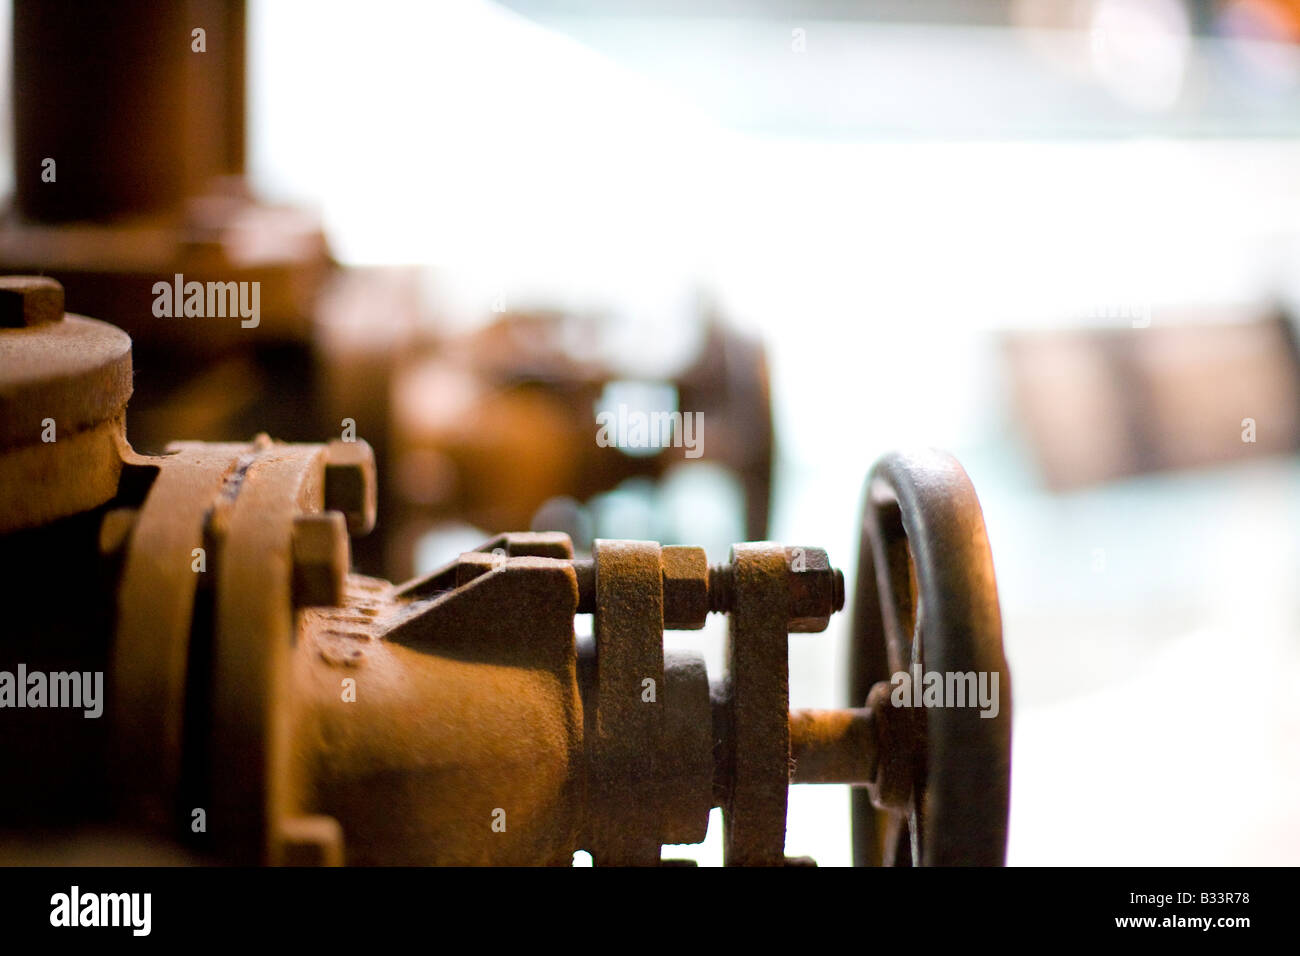 control valves in a disused industrial setting differential focus and backlit Stock Photo